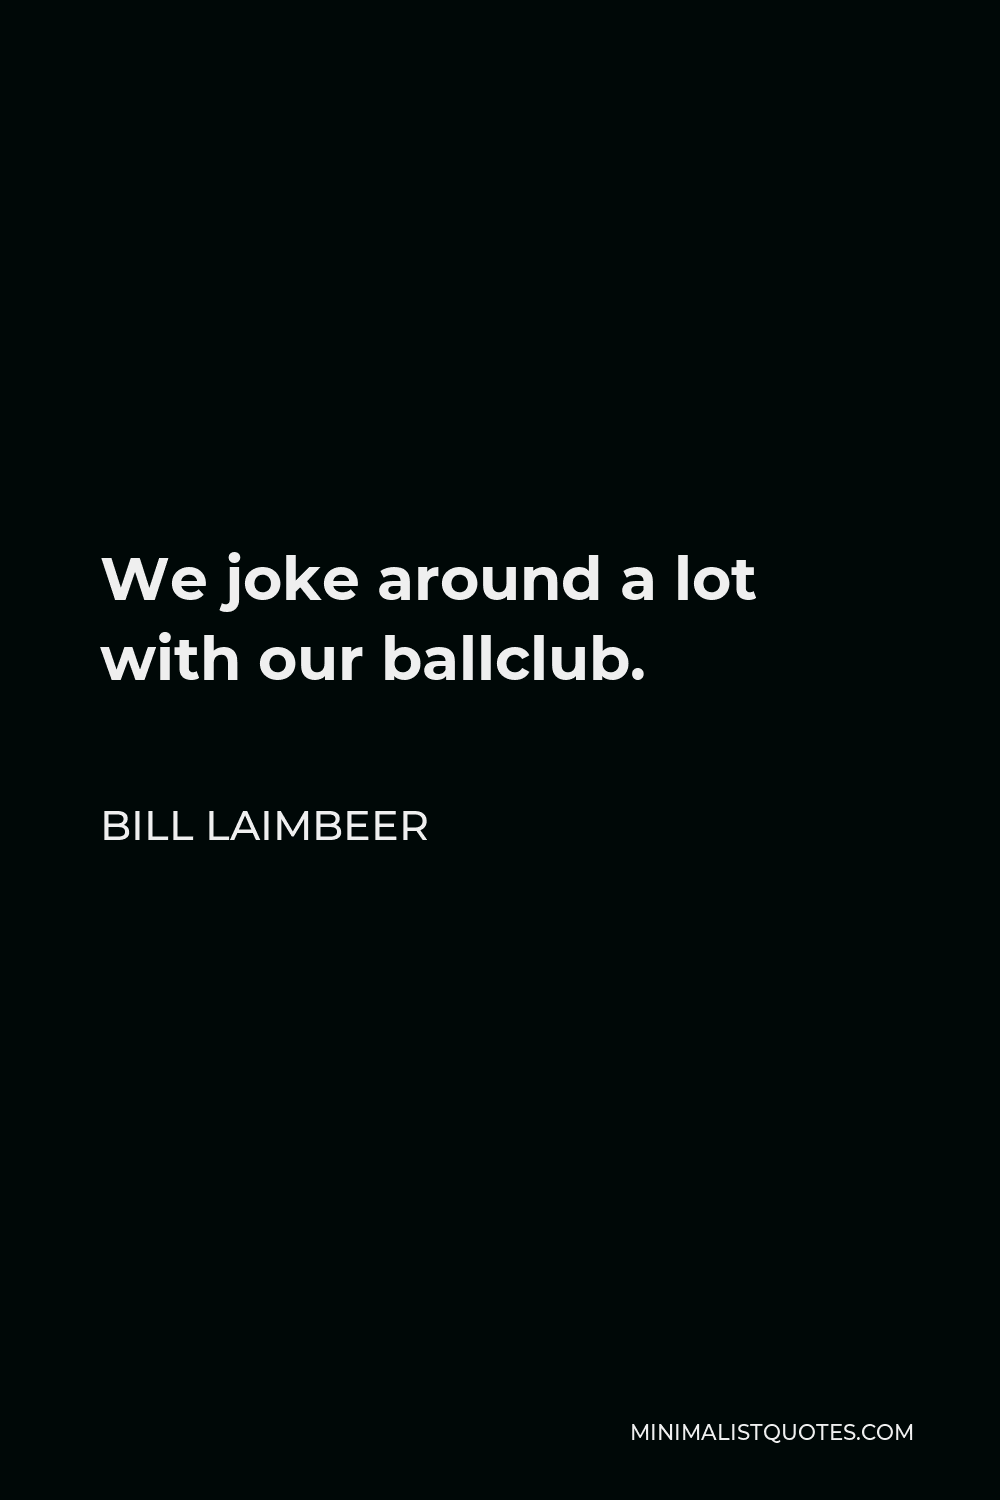 Bill Laimbeer Quote - We joke around a lot with our ballclub.